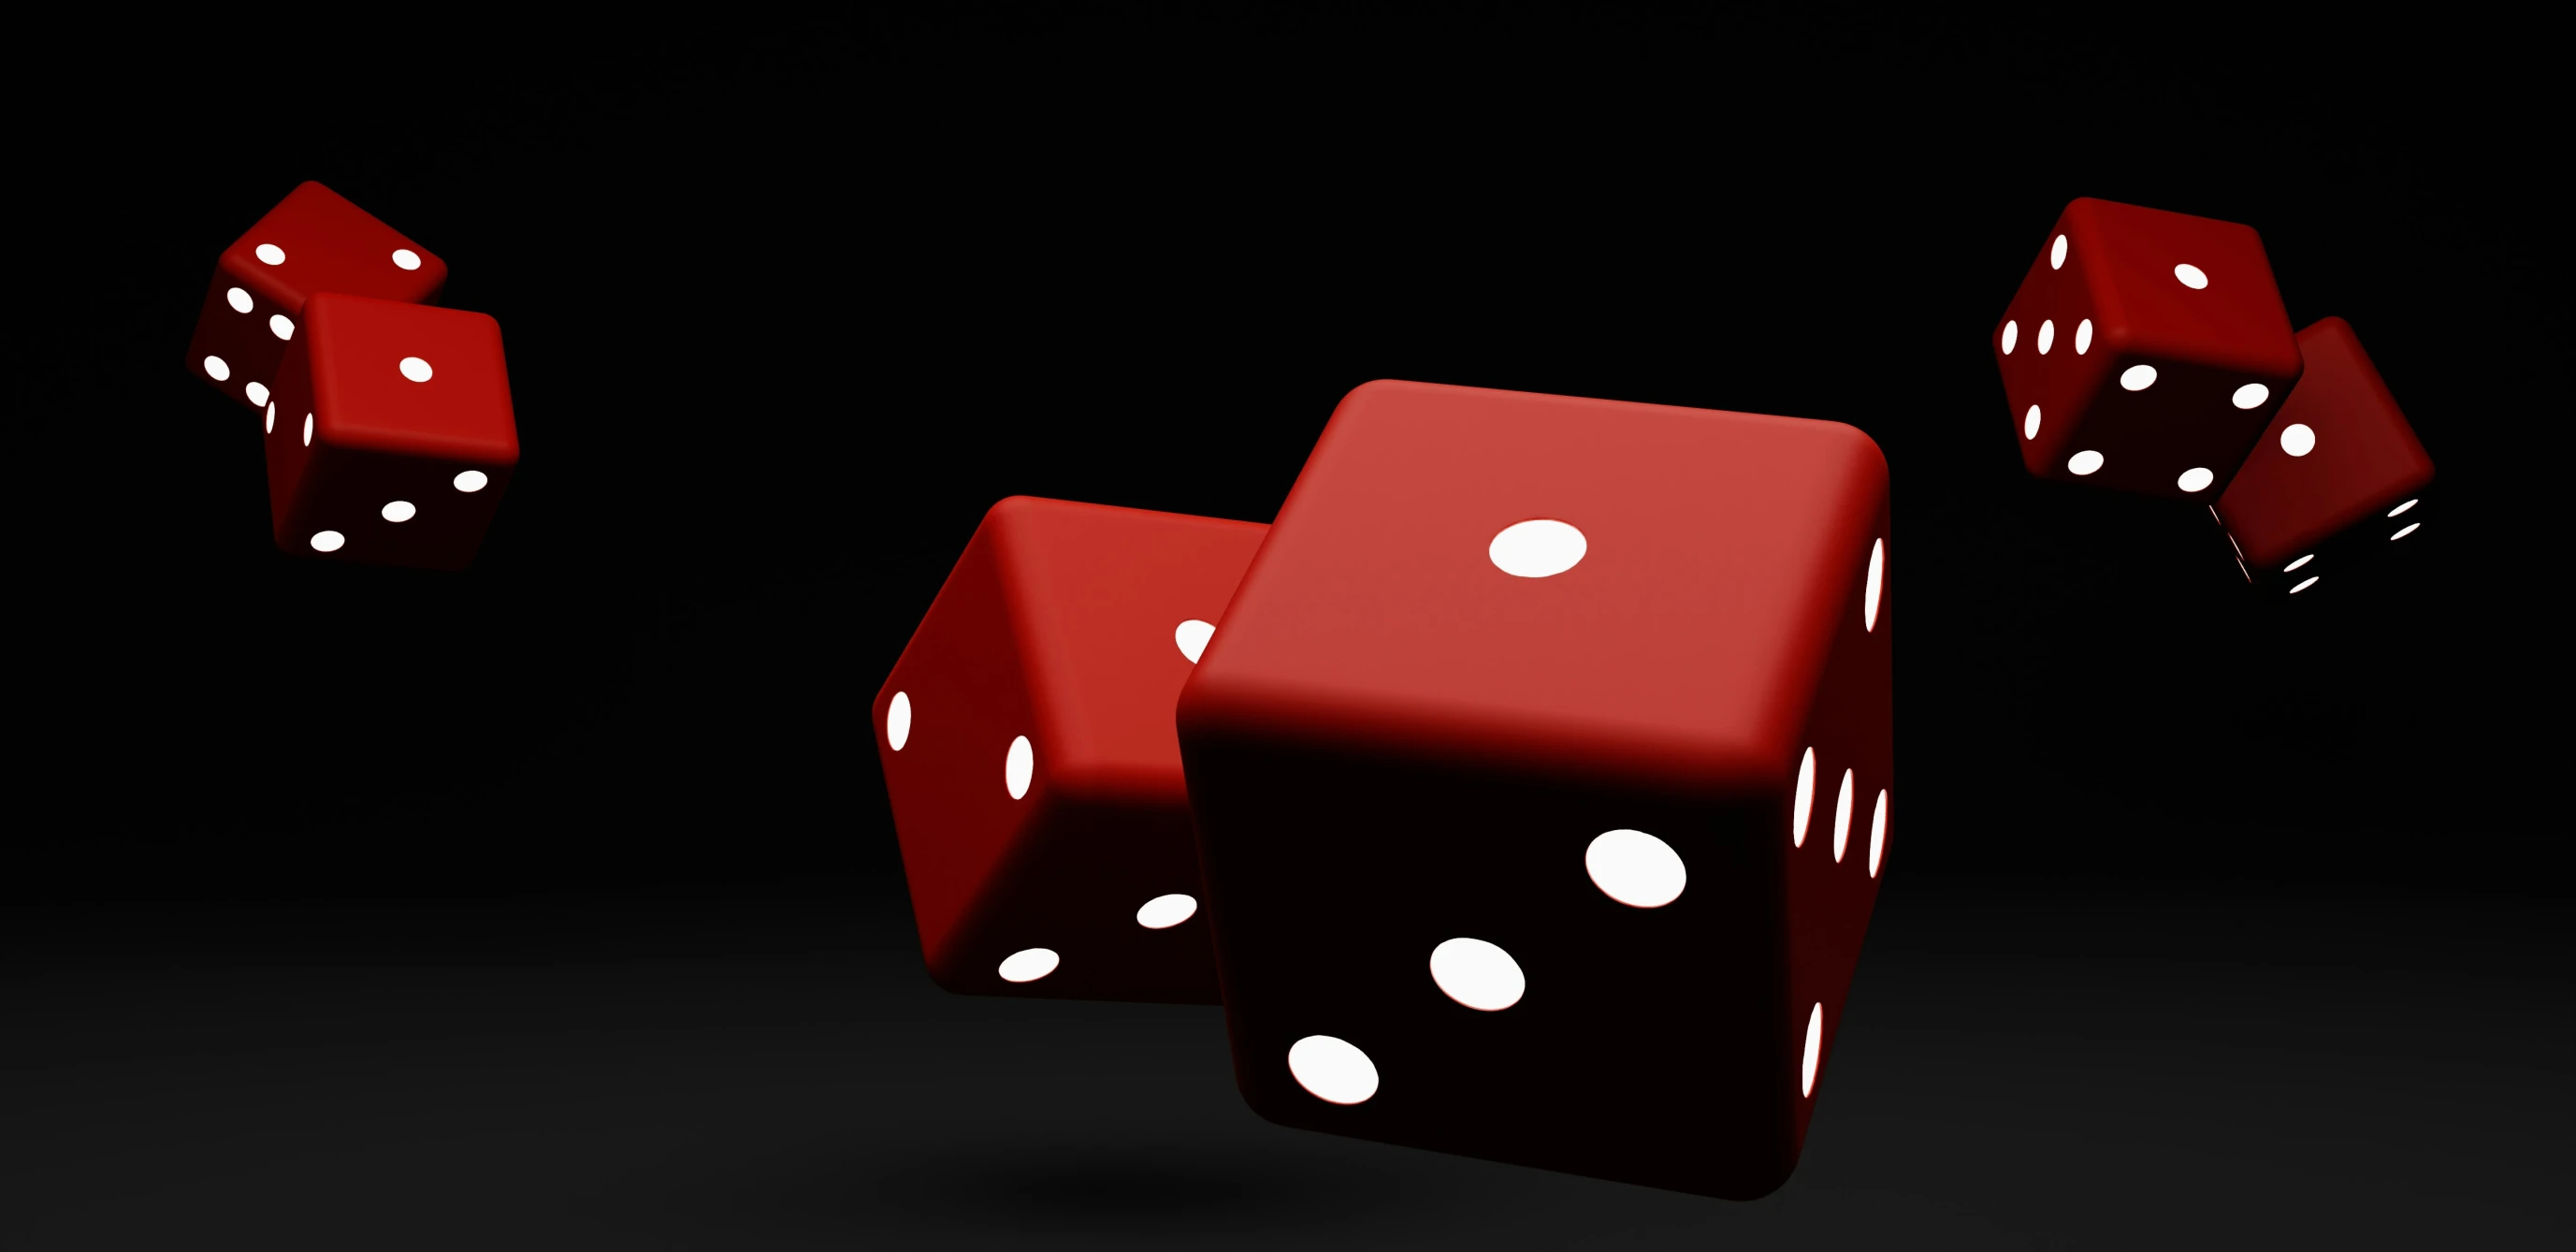 several red dices and one falling on black background